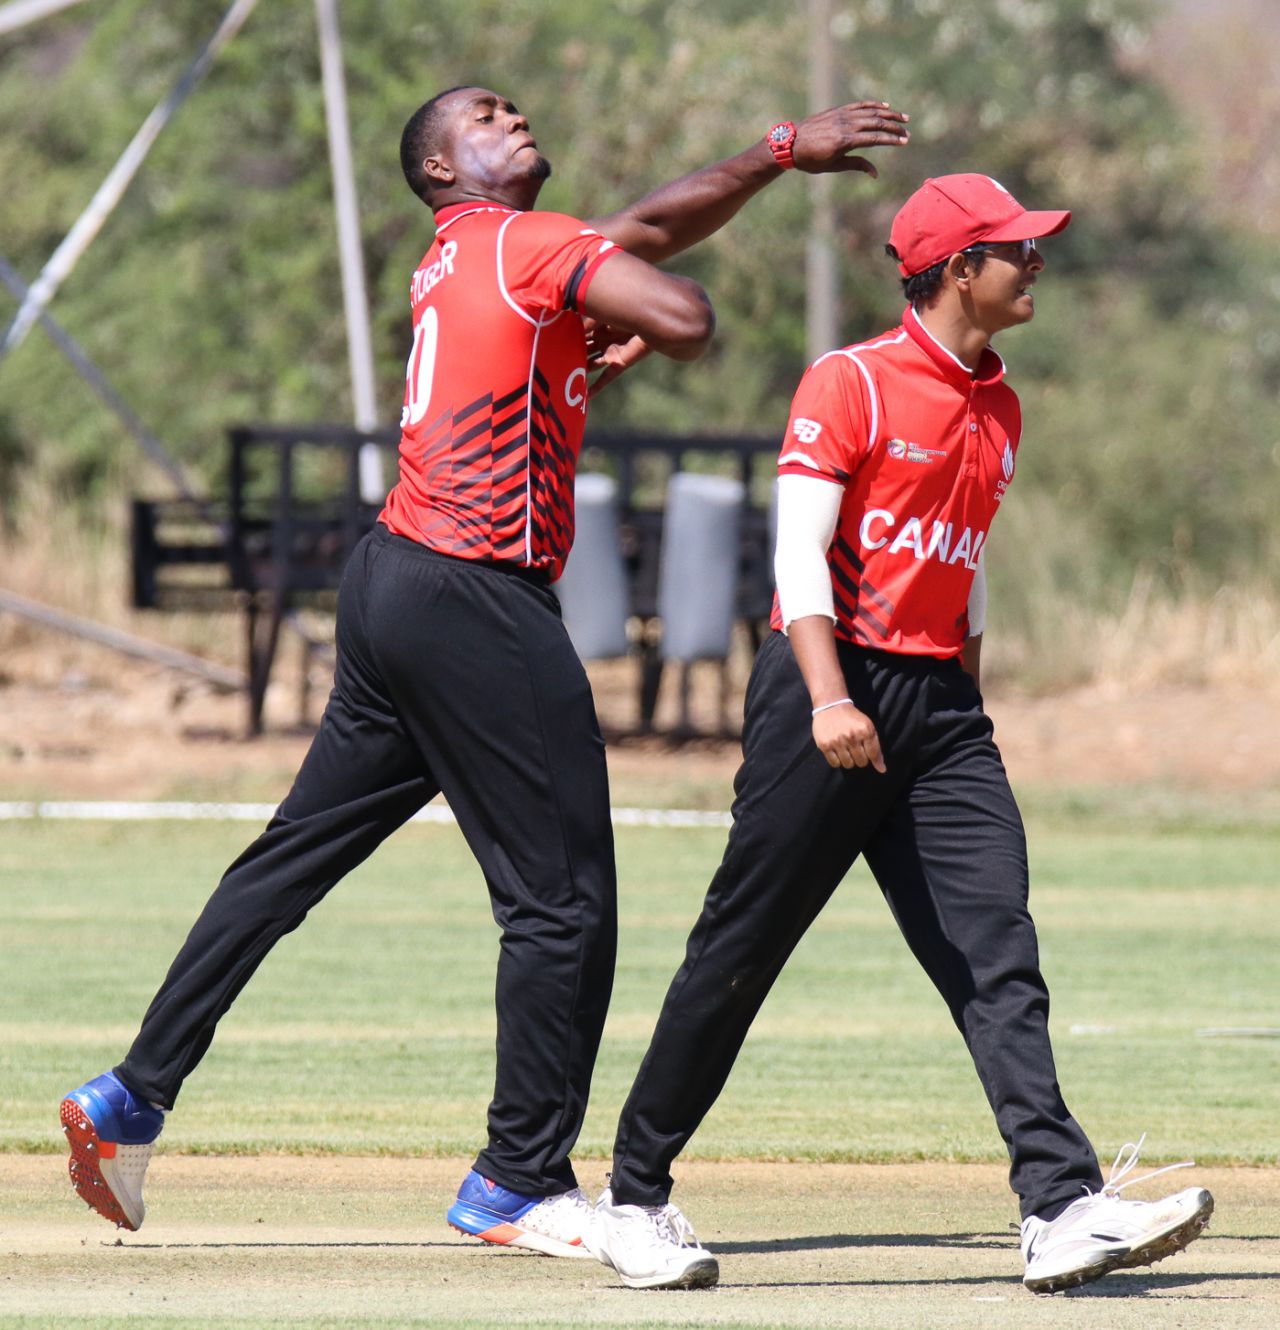 Dillon Heyliger mocks the opposition batsman while celebrating a wicket, Canada v Oman, ICC World Cricket League Division Two, Windhoek, February 8, 2018